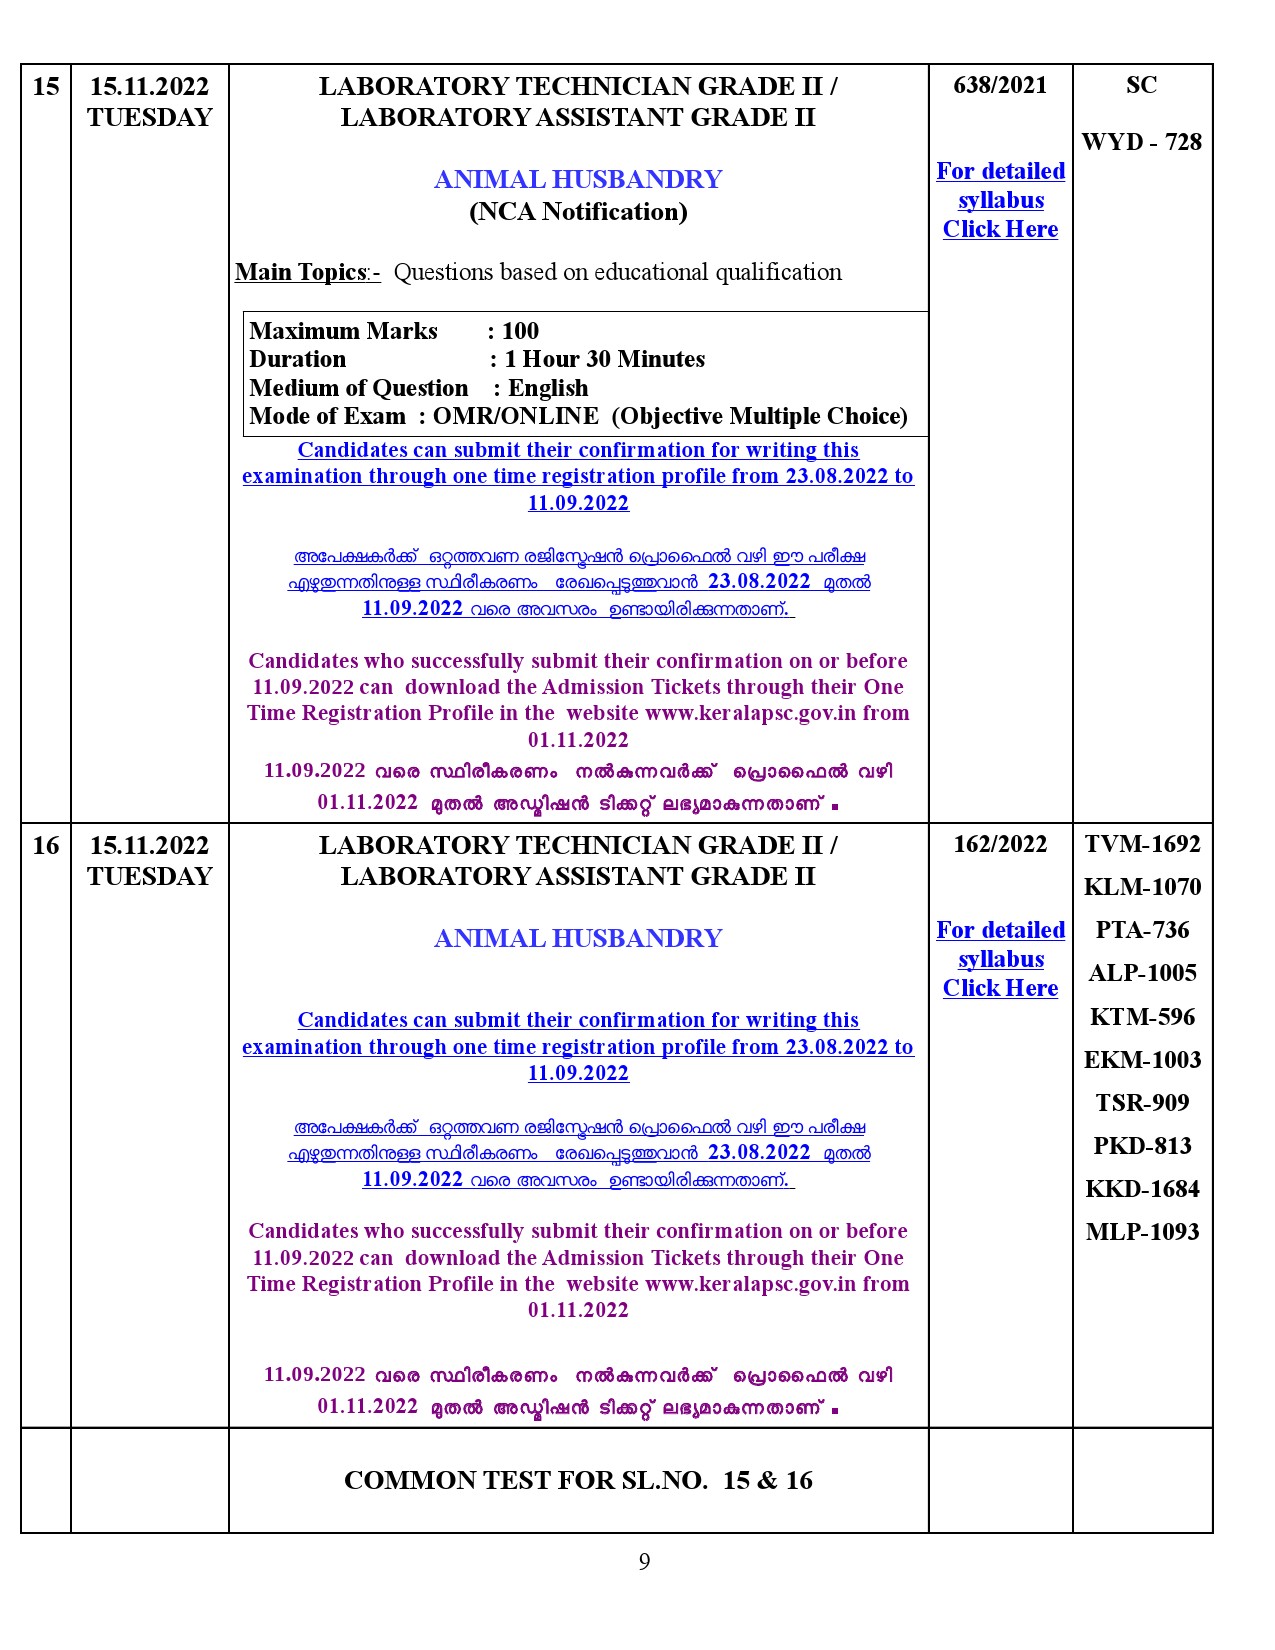 Examination Programme For The Month Of November 2022 - Notification Image 9